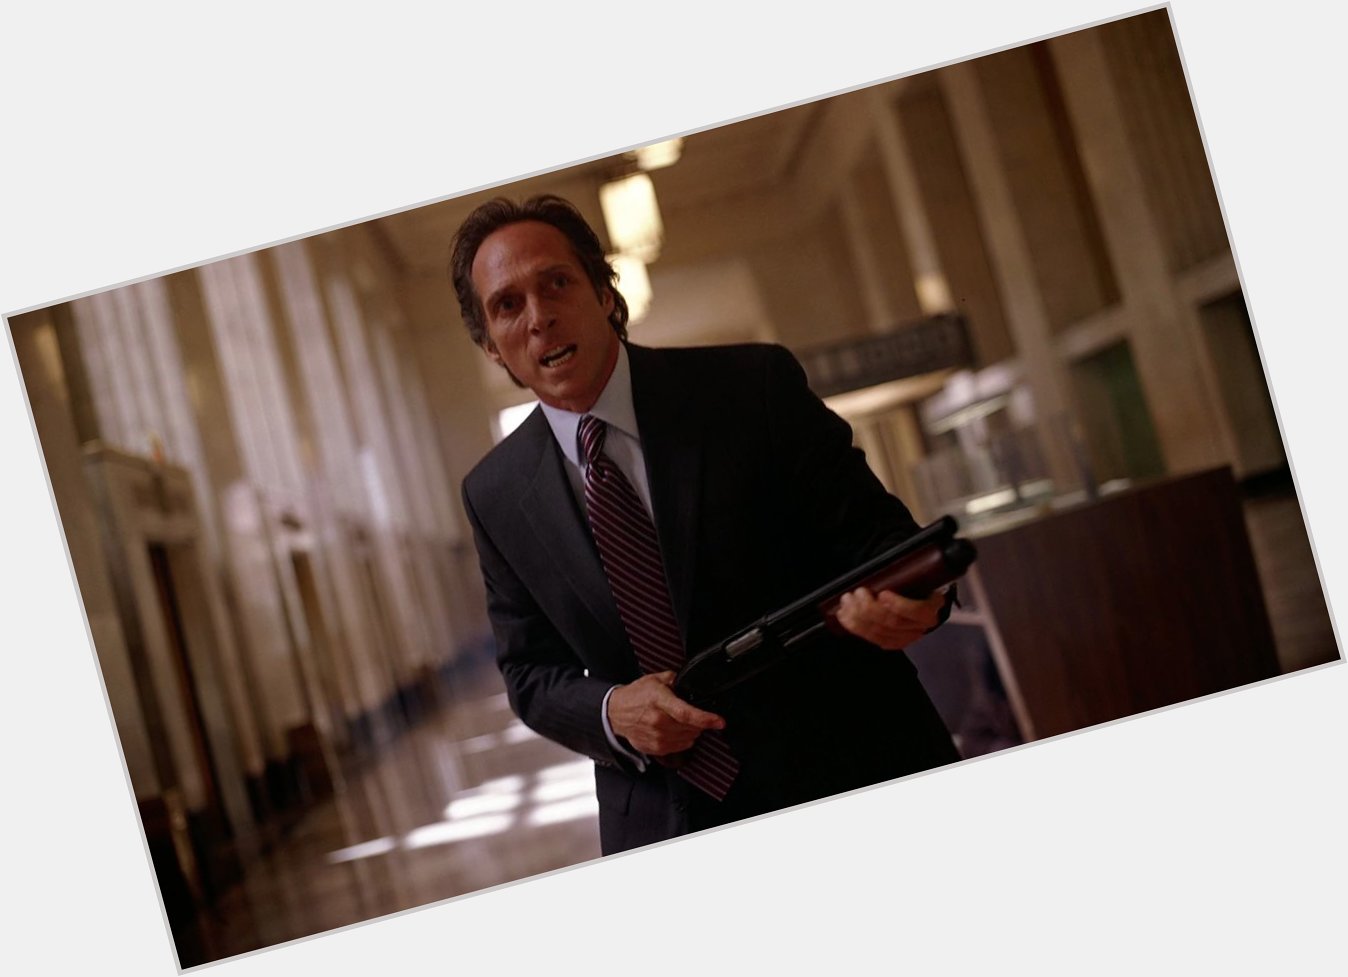 Give this man a leading role!
Happy Birthday William Fichtner! 